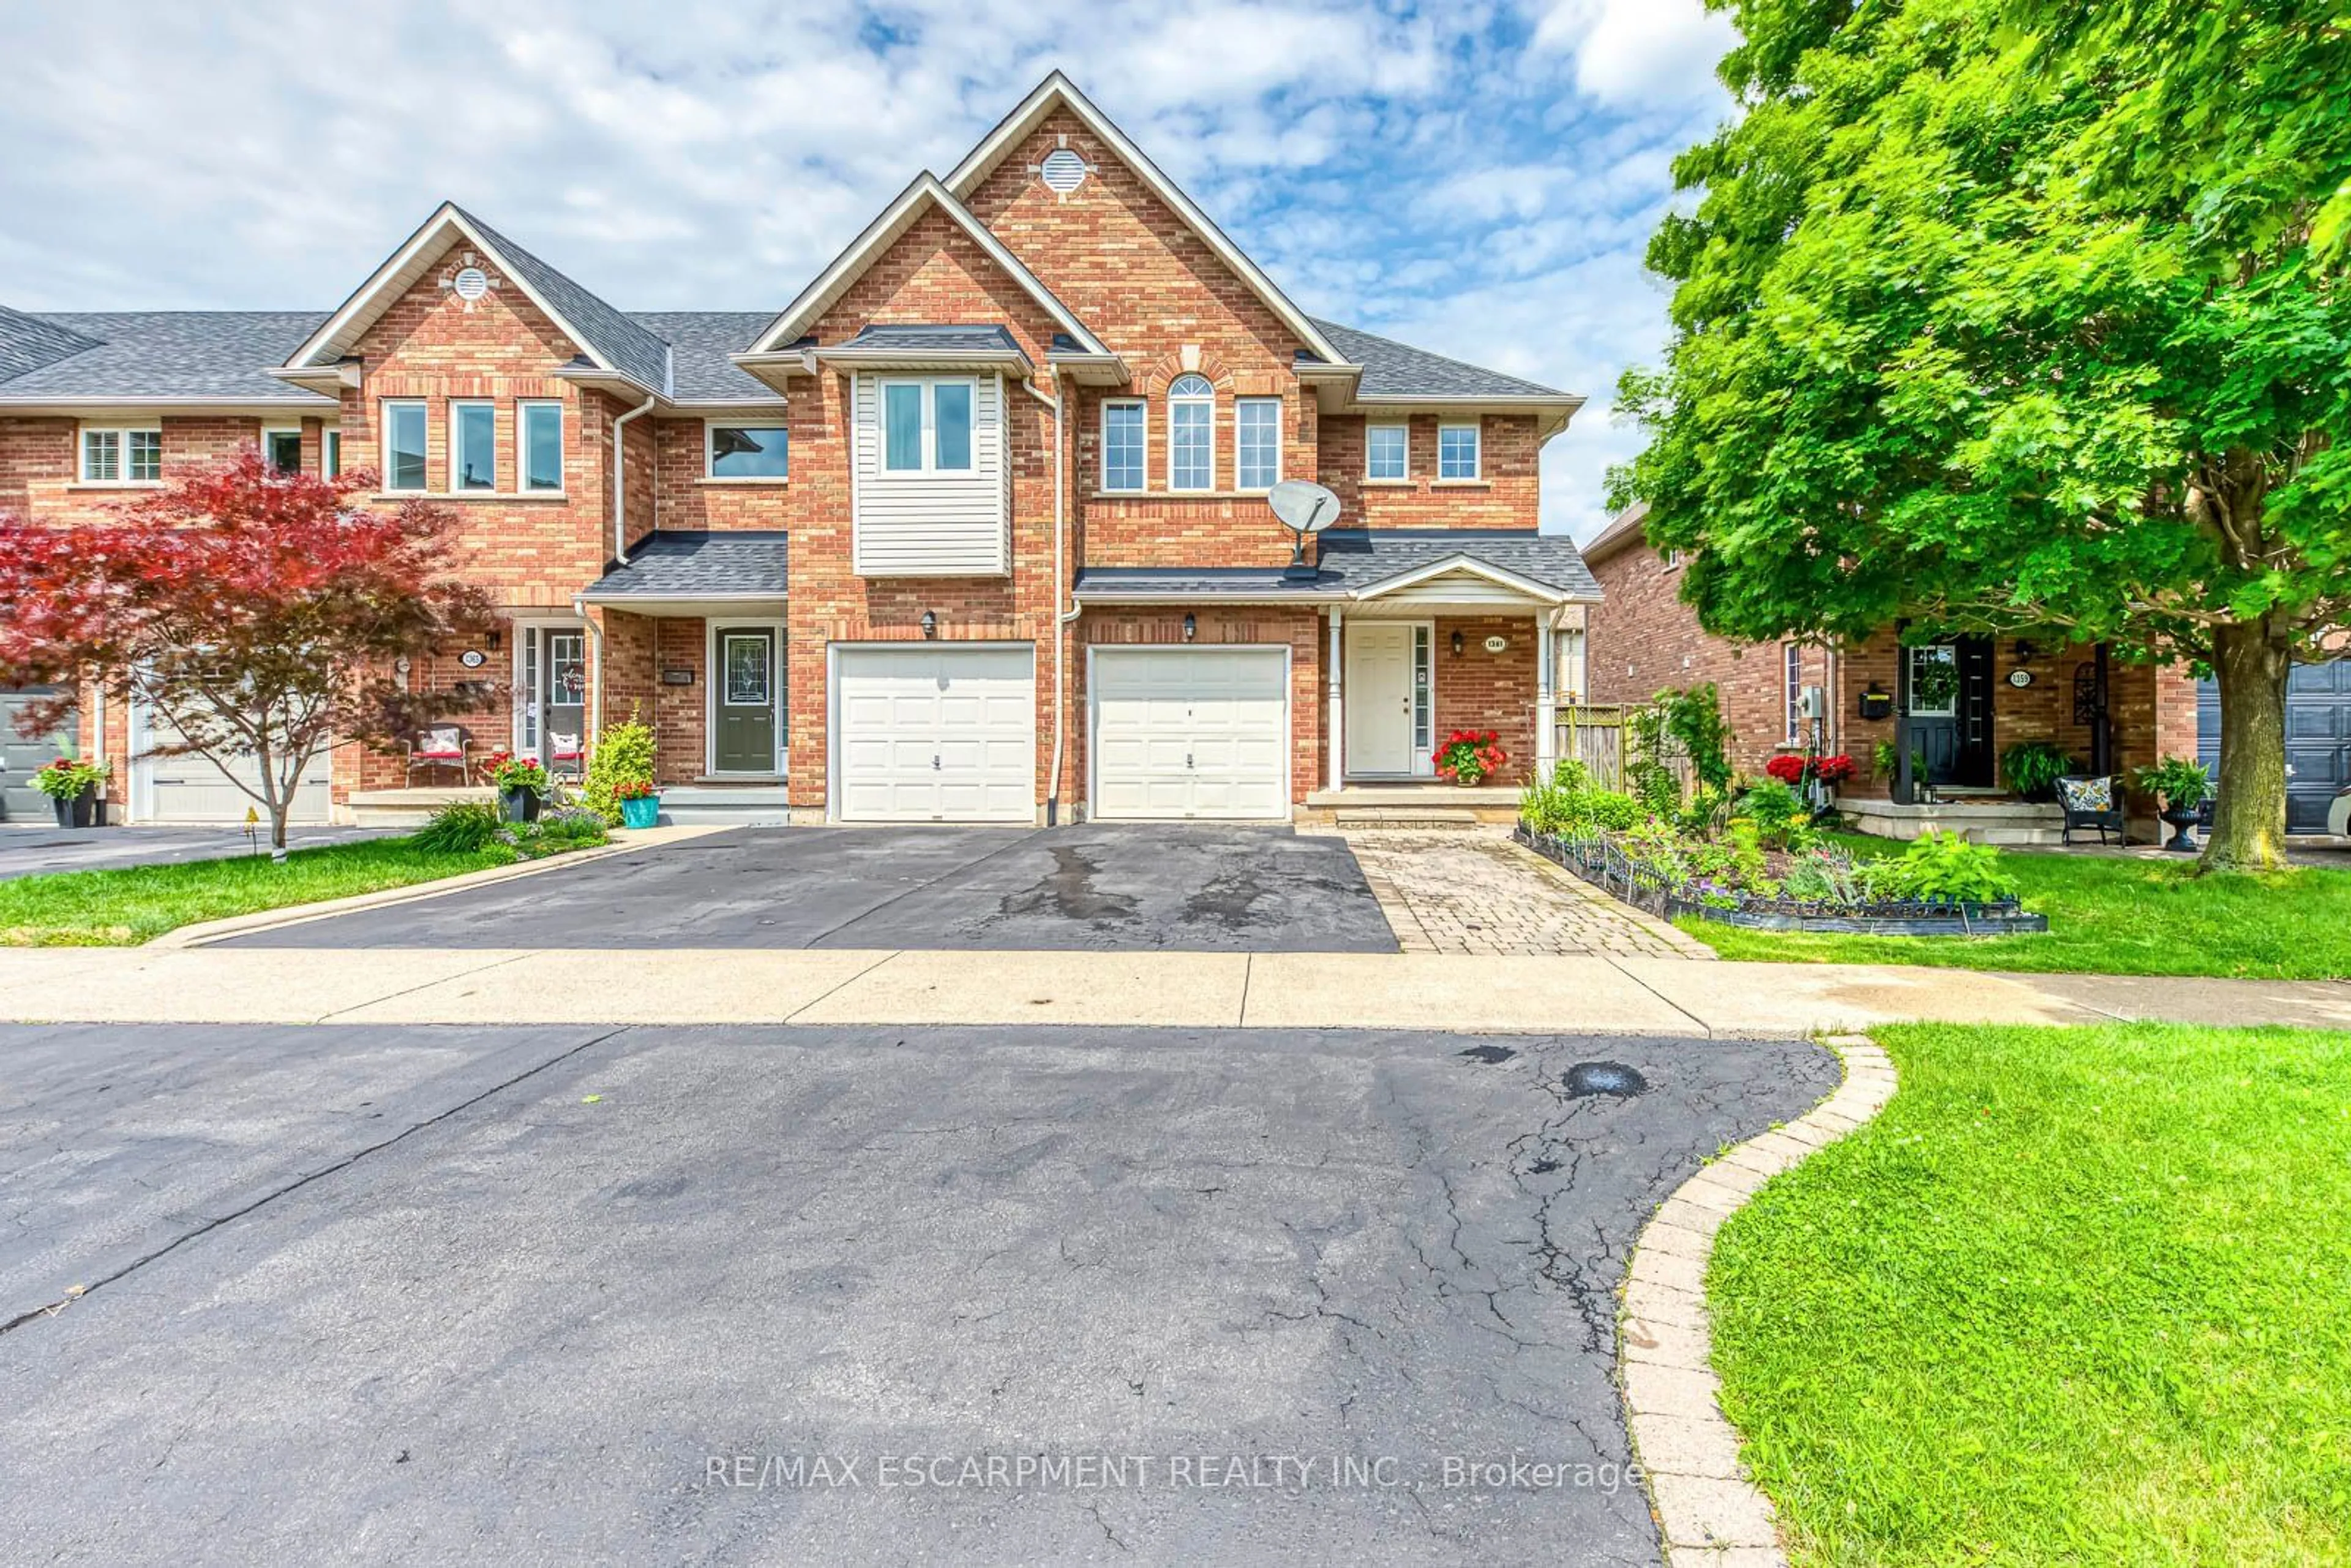 Home with brick exterior material for 1361 Tobyn Dr, Burlington Ontario L7M 4X6